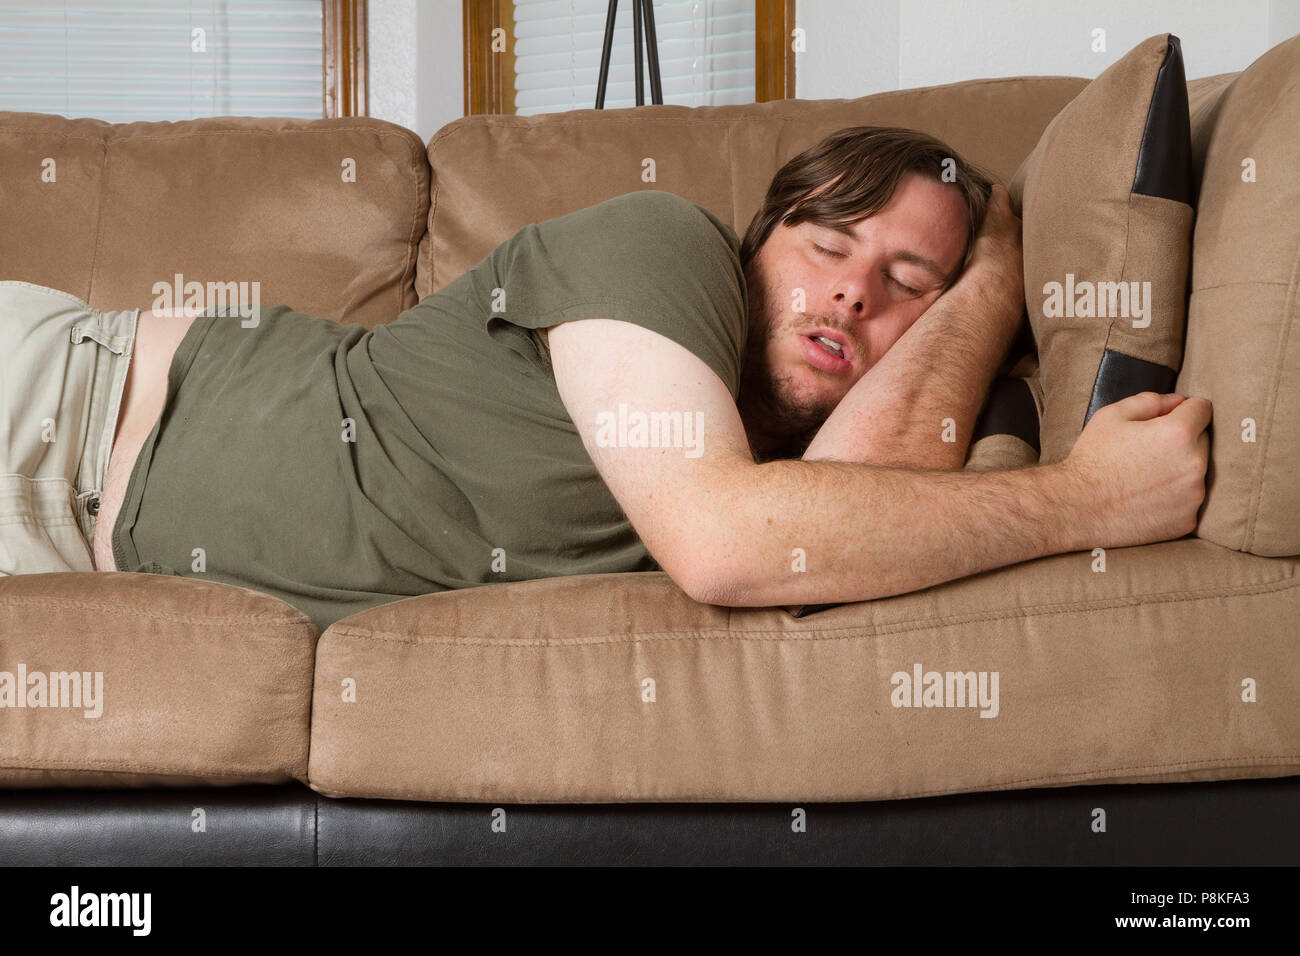 Asleep on the couch after a hard day. Stock Photo